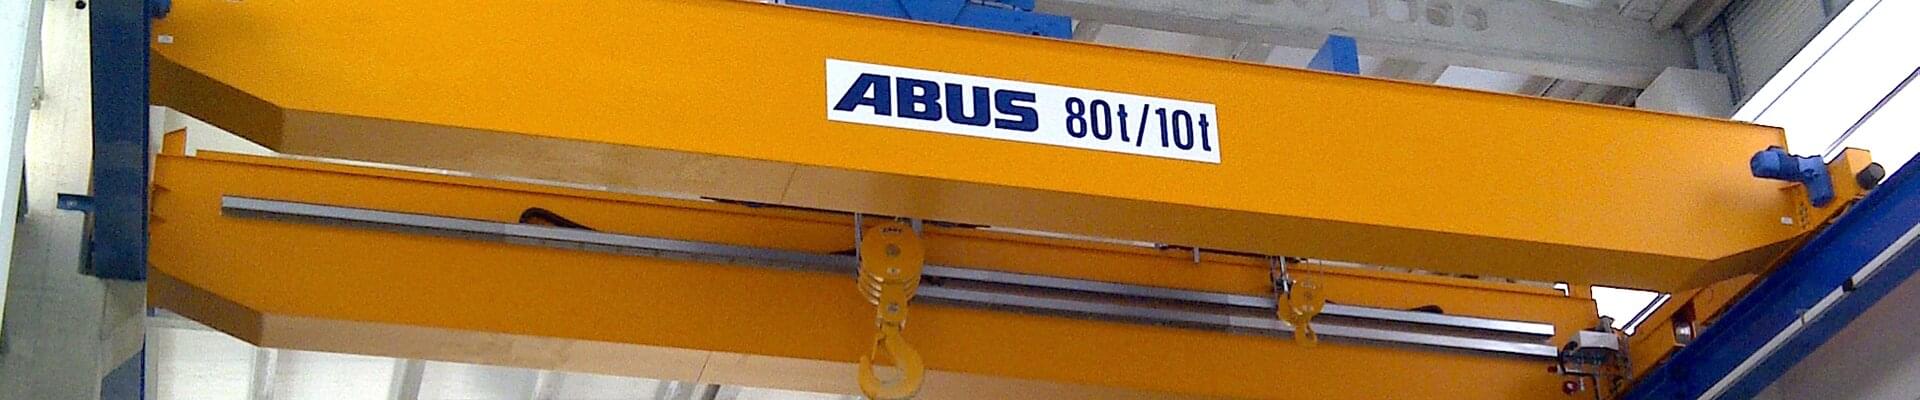 ABUS overhead travelling crane with 80t/10t lifting capacity in shipbuilding company in northwest Spain